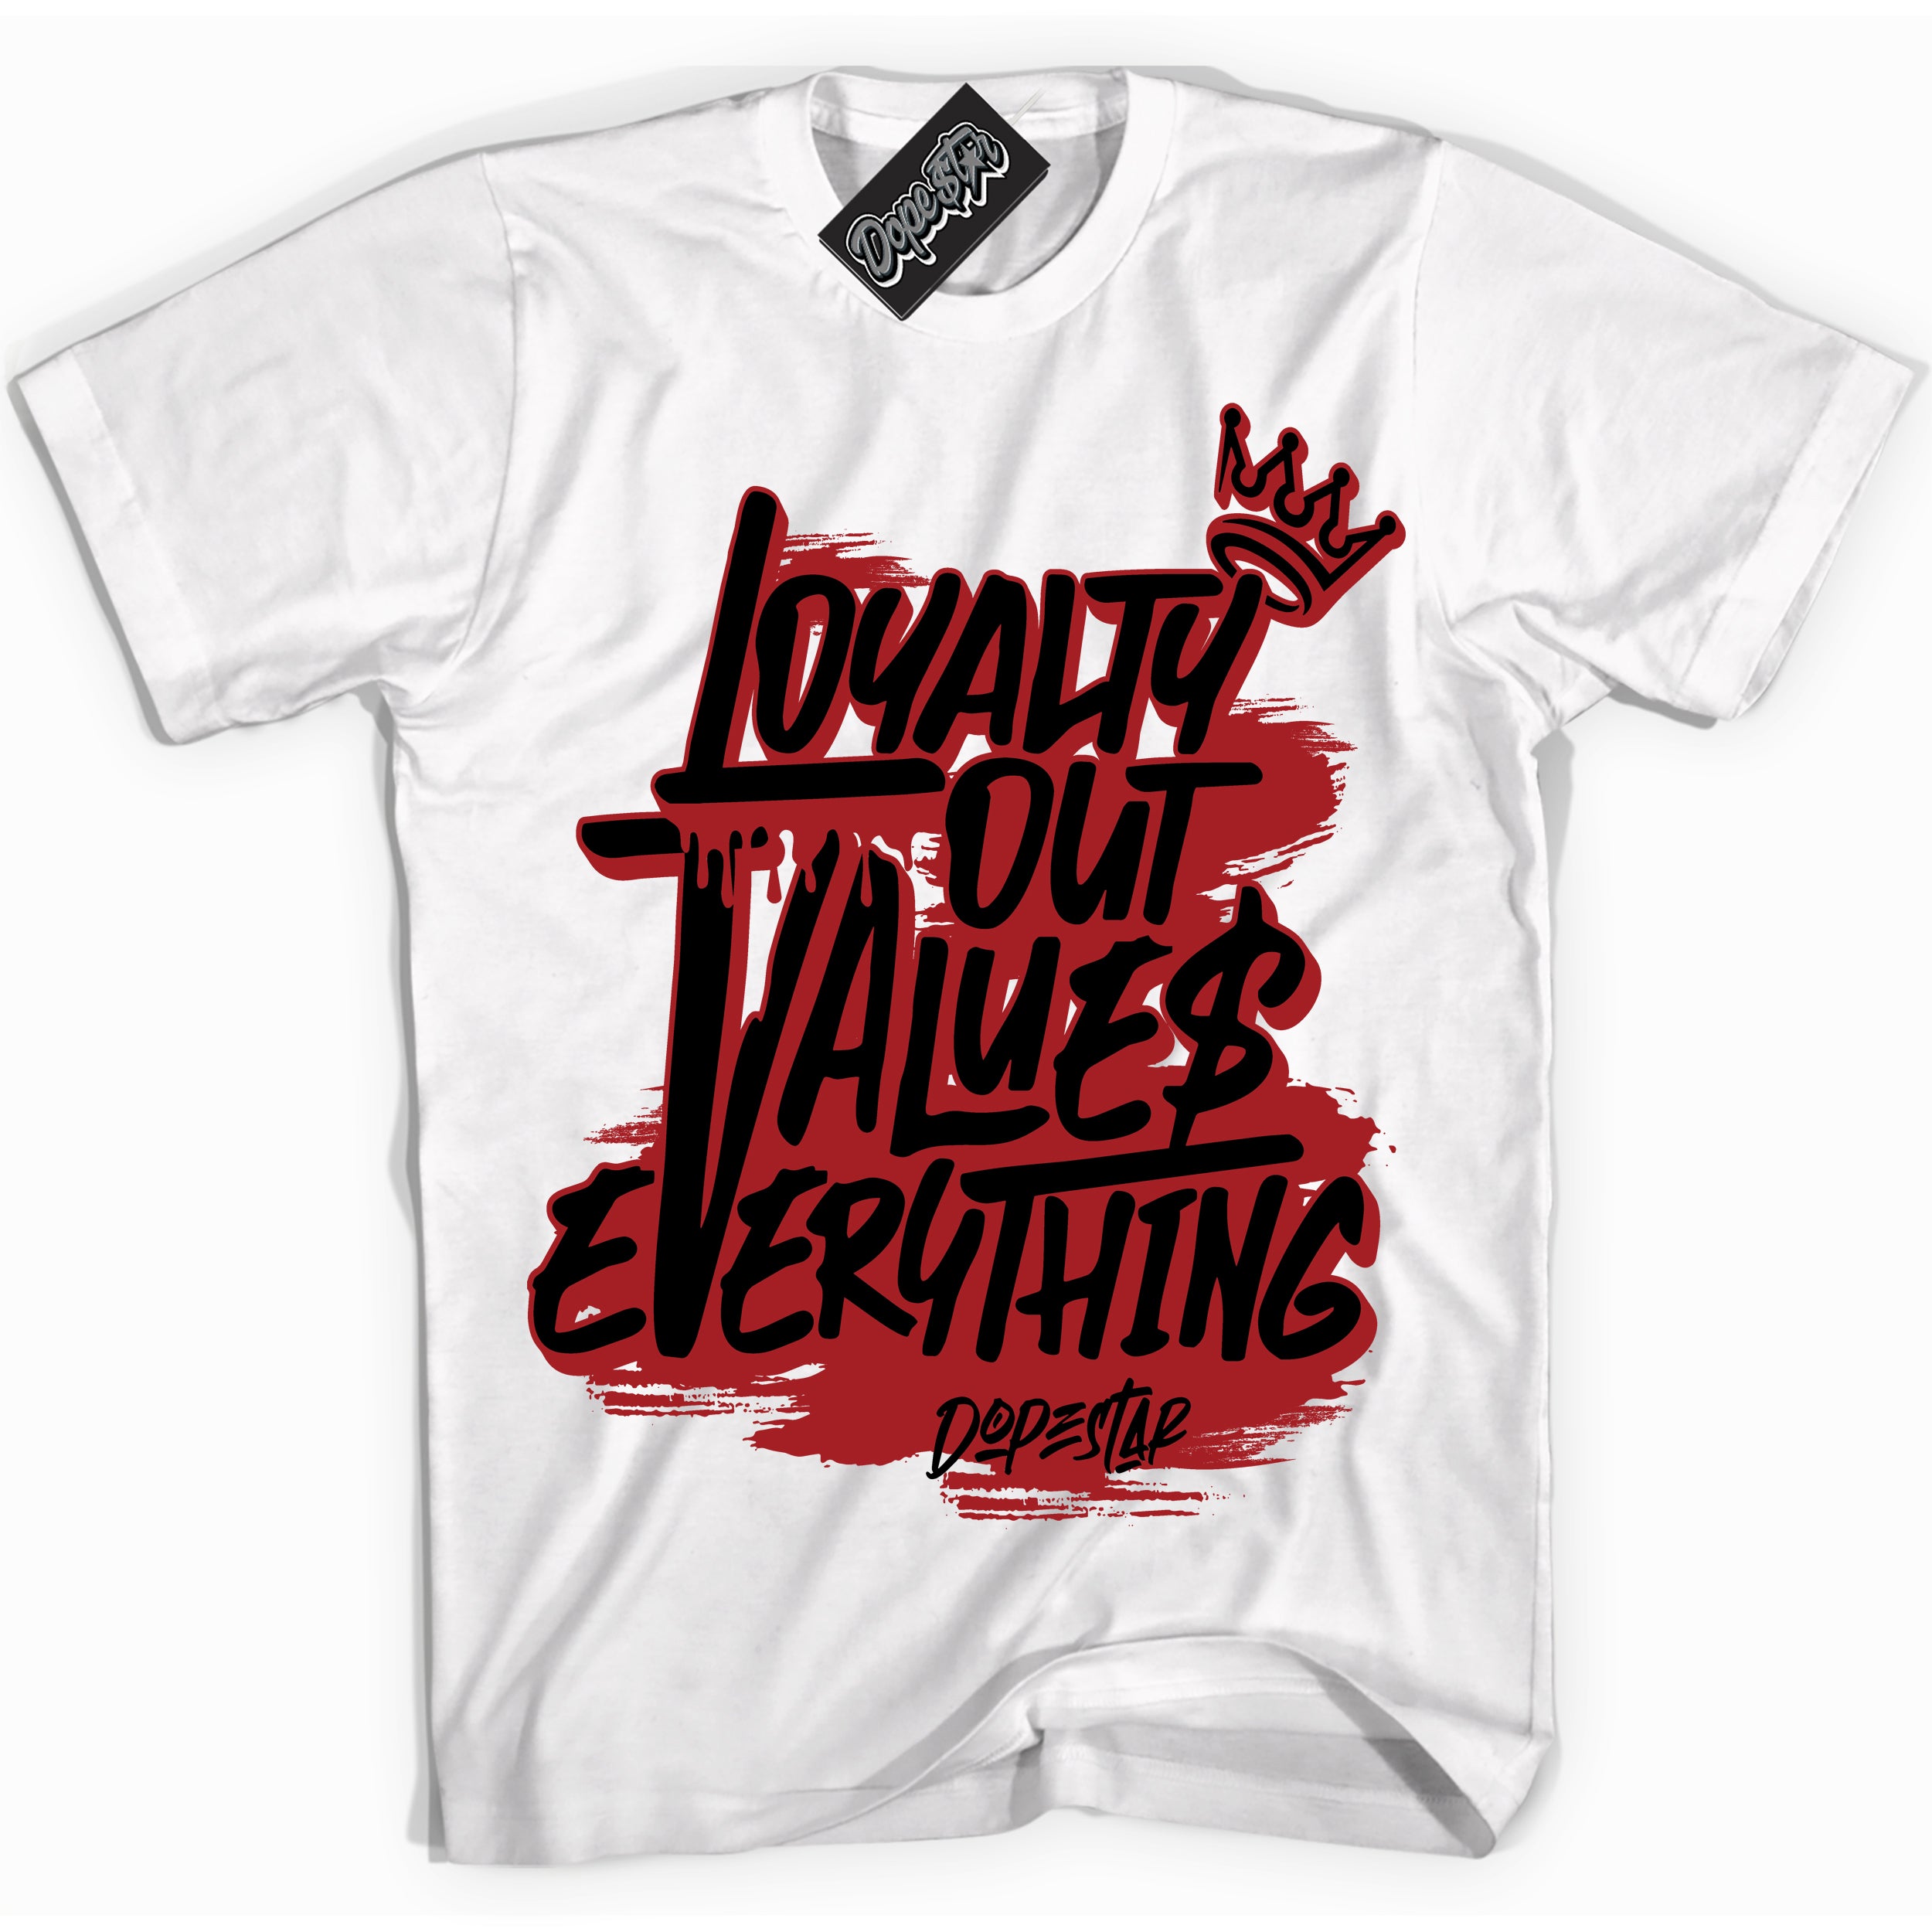 Cool White Shirt with “ Loyalty Out Values Everything” design that perfectly matches Lebron 20 Liverpool Sneakers.